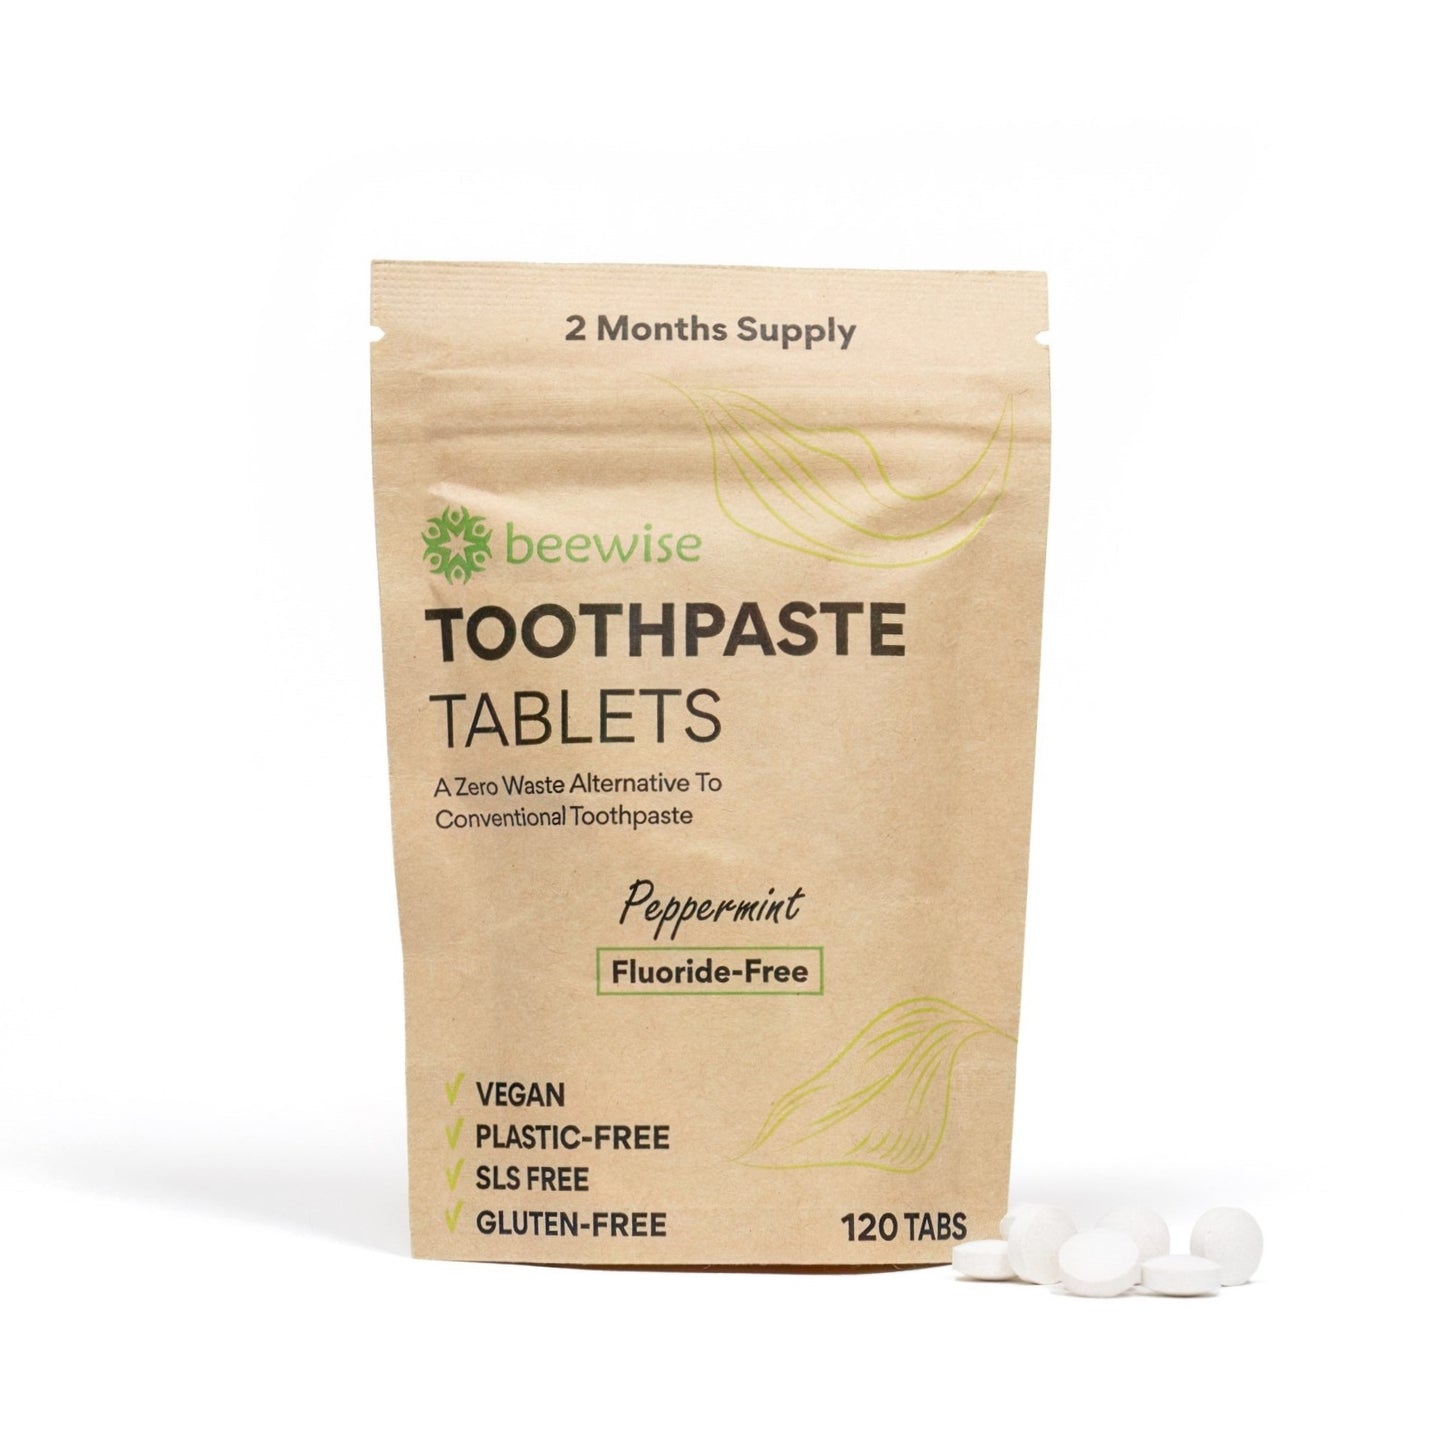 toothpaste tablets in a kraft paper packaging plastic-free made in amsterdam uk